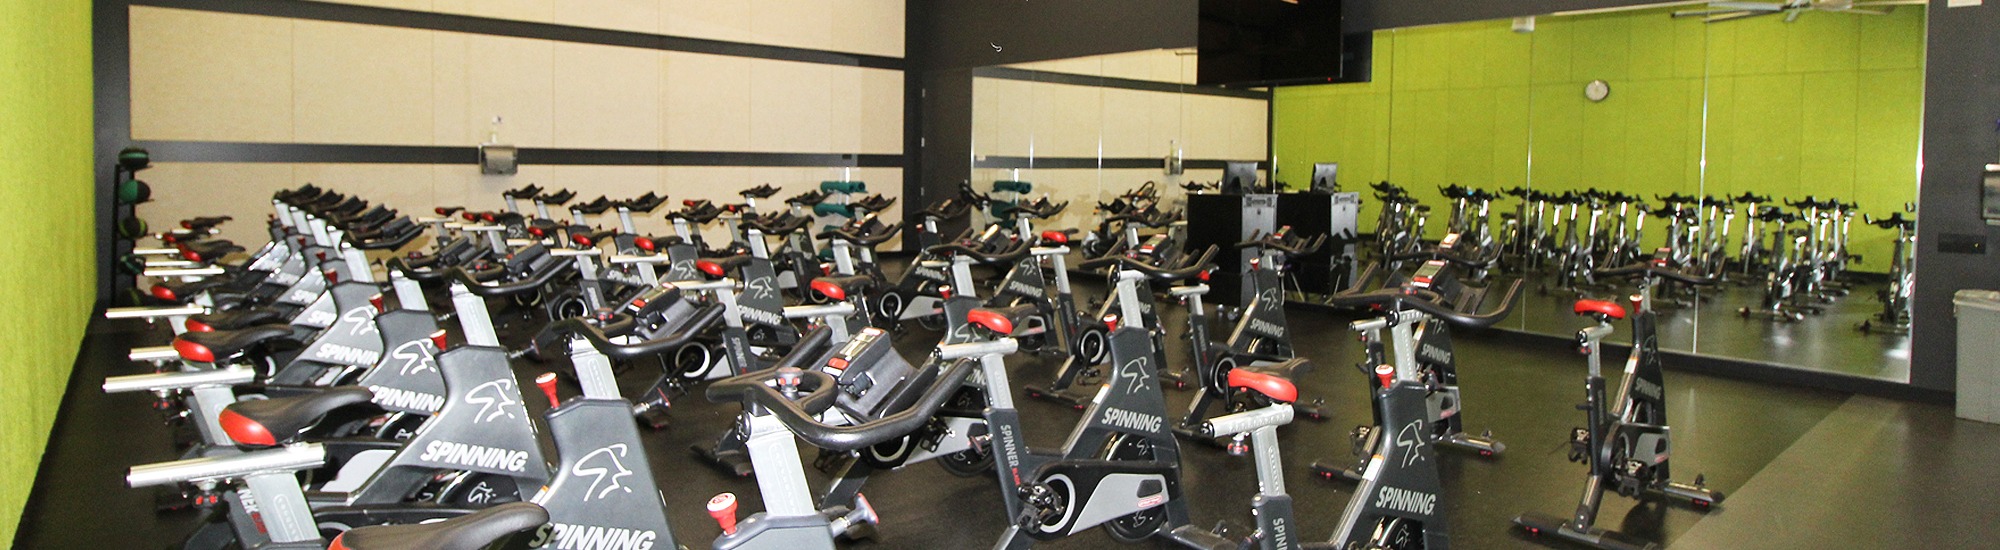 Room full of spin bikes and a large mirror at Campus Rec UArizona